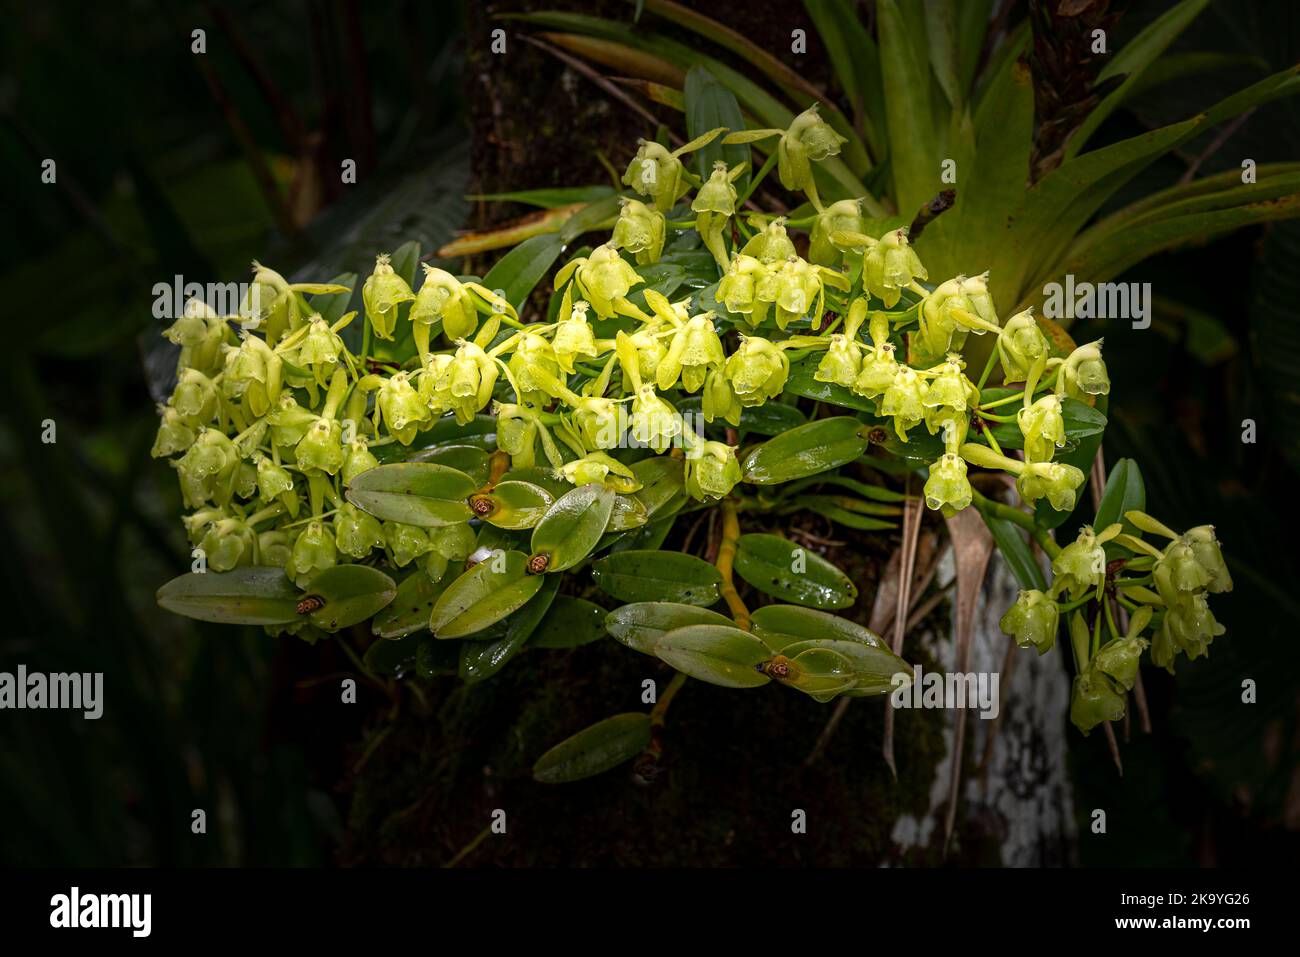 Epidendrum amparoanum green orchid flowers image taken in Panamas cloud forest Stock Photo